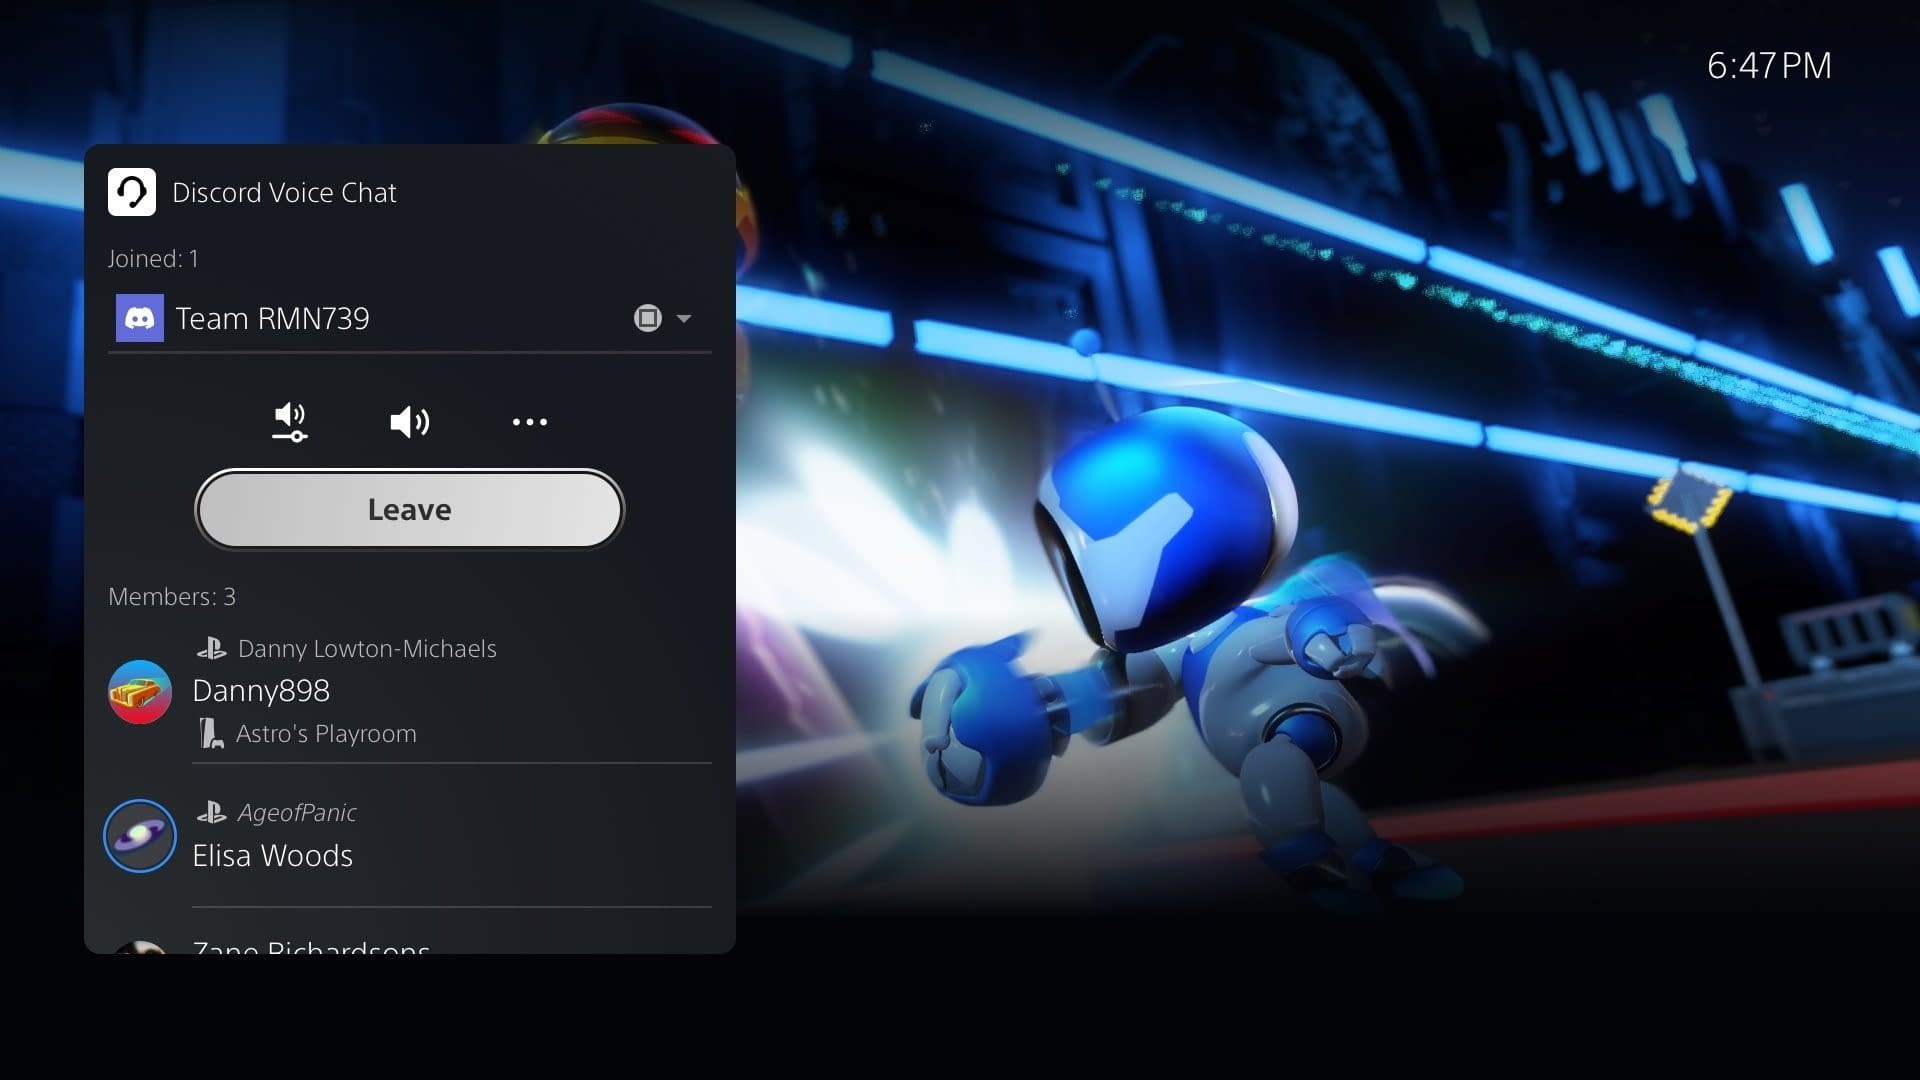 New Software Update for PS5 Comes: Discord Voice Chat and More